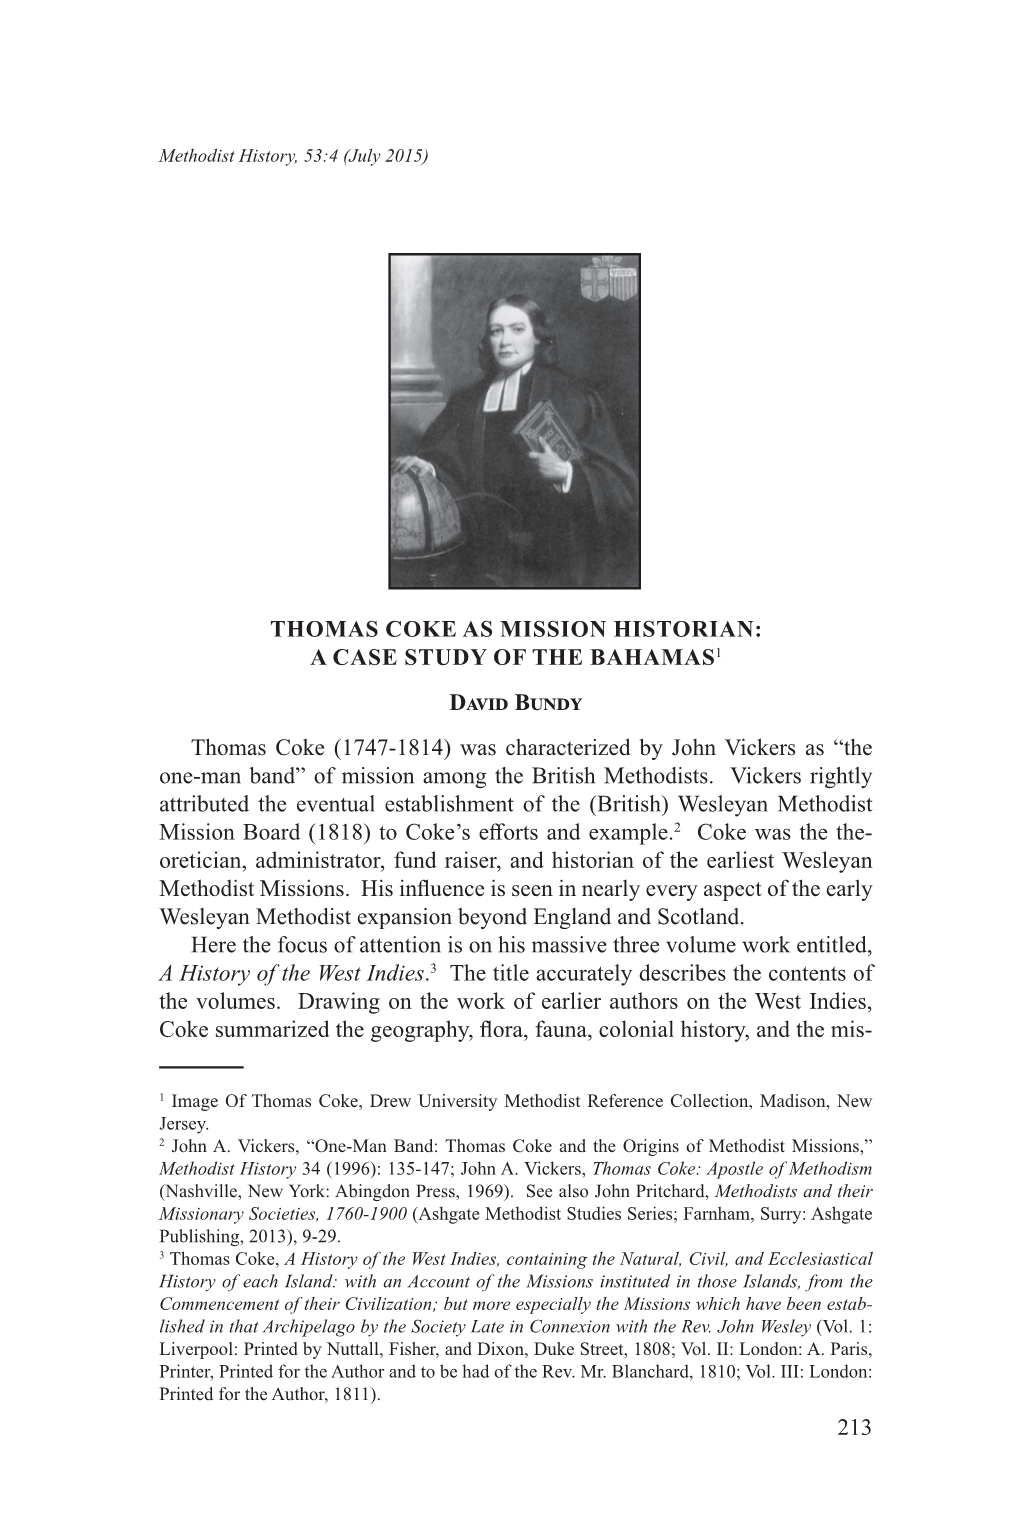 A CASE STUDY of the BAHAMAS1 David Bundy Thomas Coke (1747-1814) Was Characterized by John Vickers As “The One-Man Band” of Mission Among the British Methodists